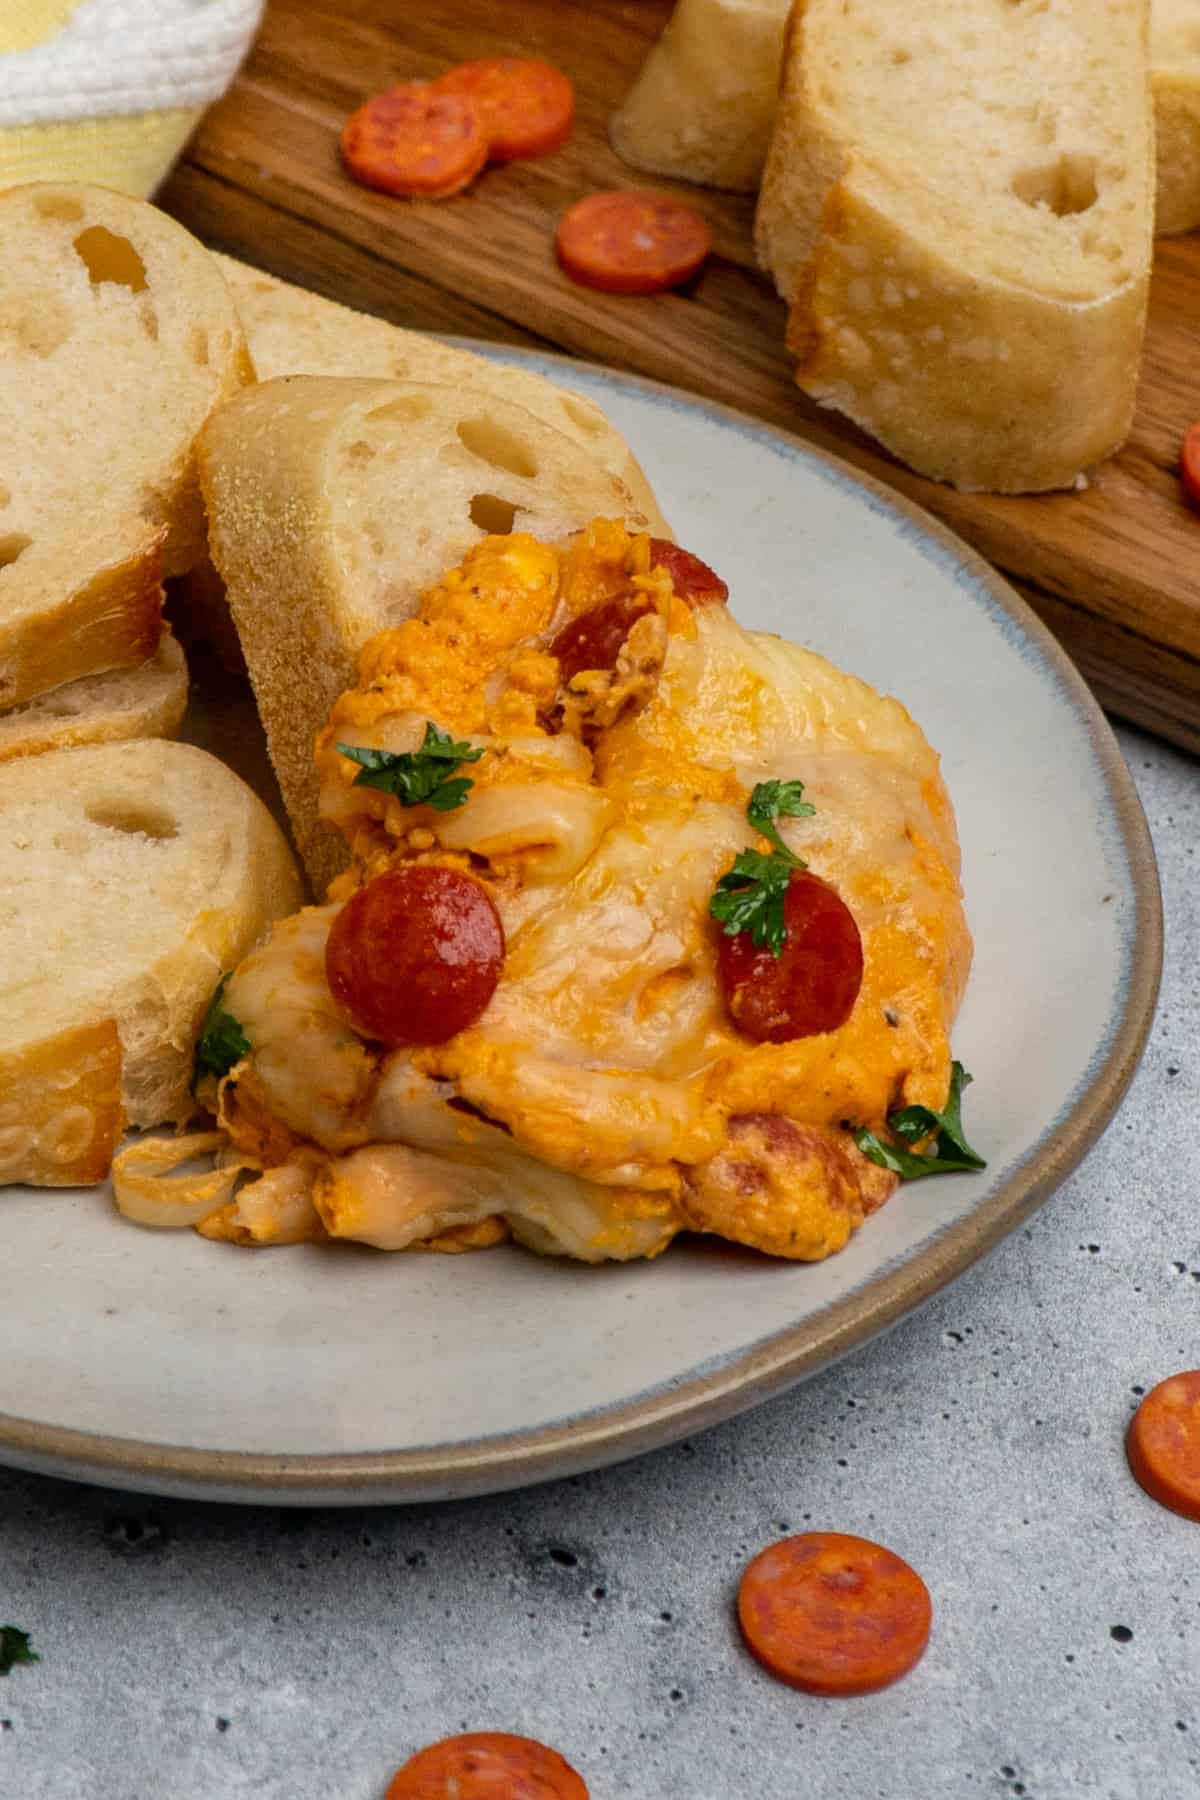 Pizza dip on a plate with bread